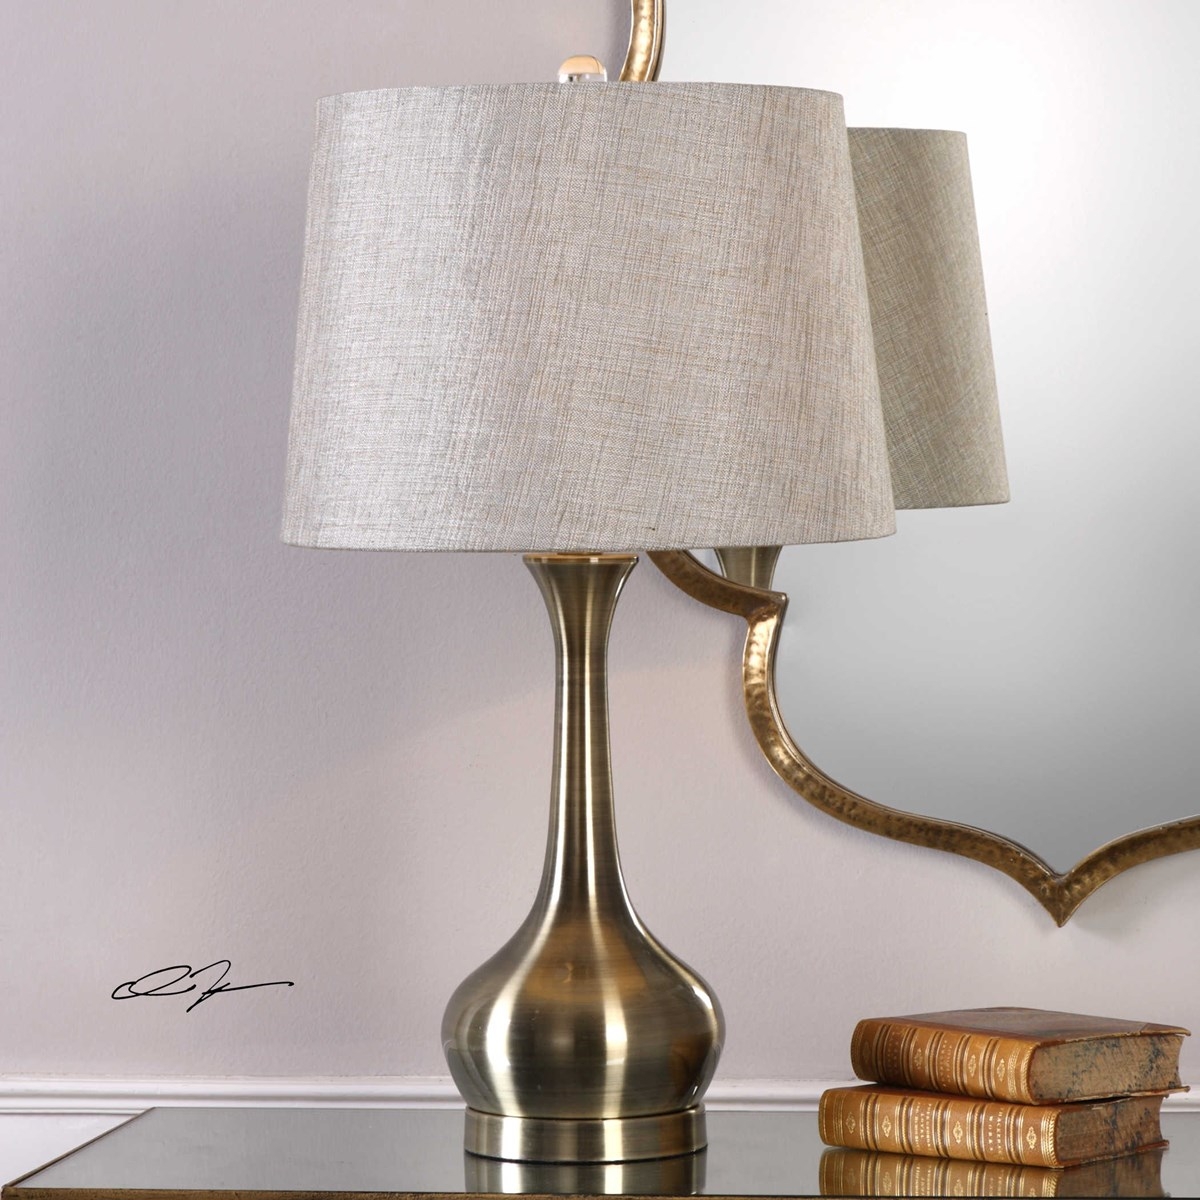 Balle Table Lamp - Image 1